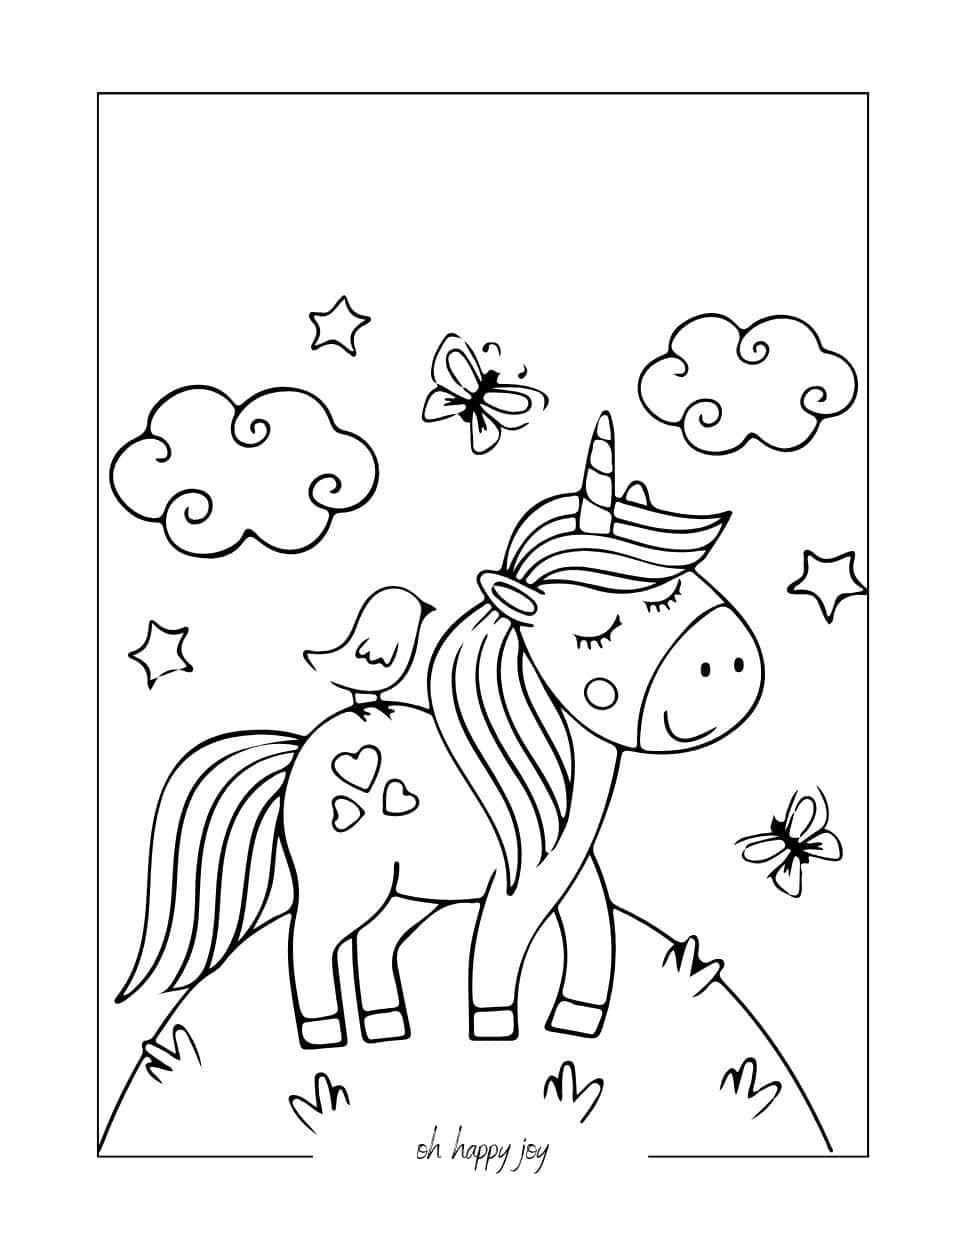 Unicorn in Nature Coloring Page